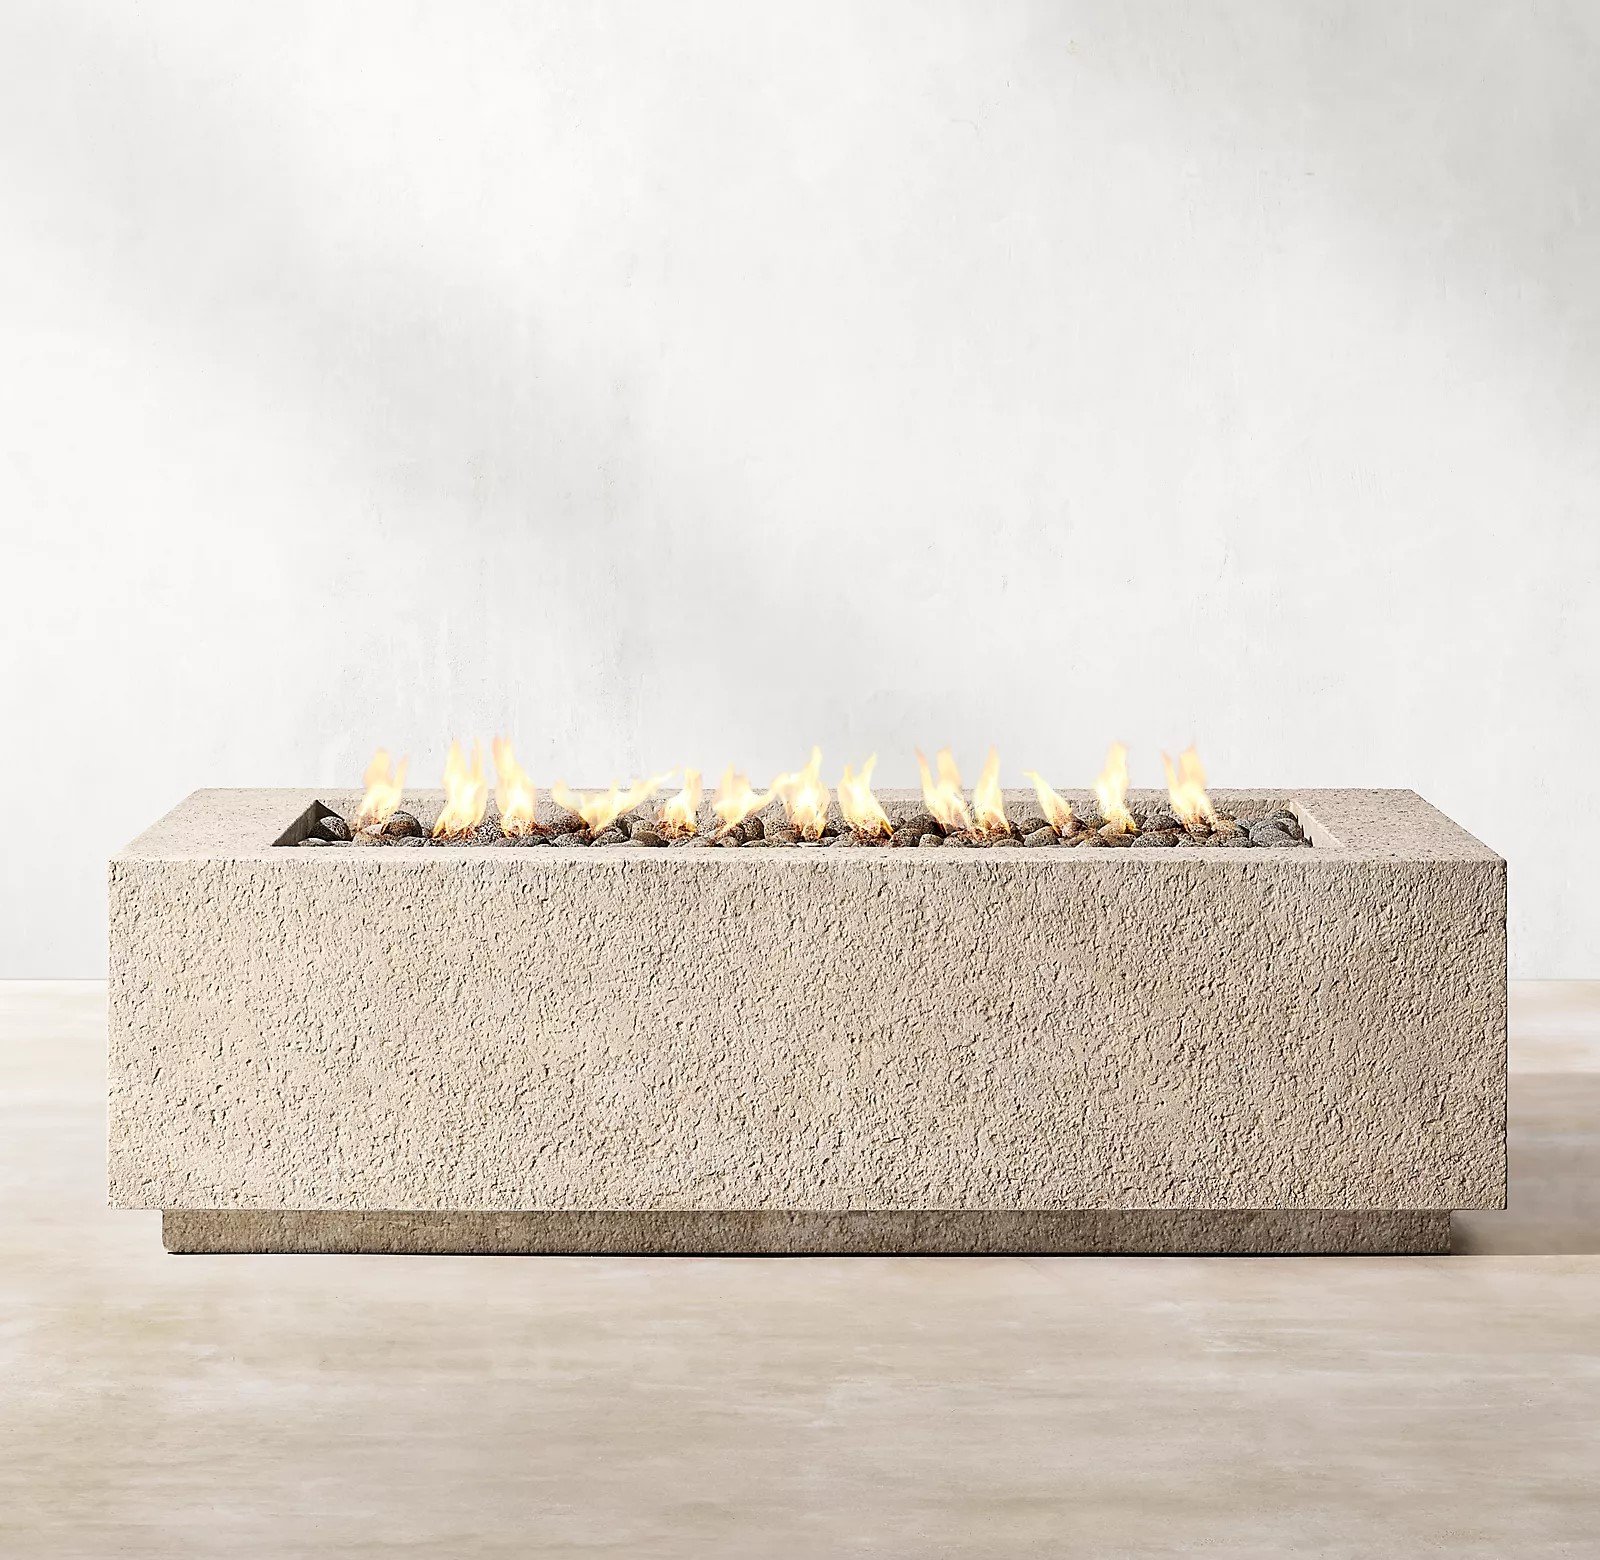 RH’s Yountville Rectangular Fire Table - Pairing minimalist geometry with rustic, hand-hewn texture, the Yountville gas fire pit table offers a bold, elemental presence outdoors. Masterfully crafted of concrete composite for the look of weathered stone with natural lava rock, it is a durable, lighter-weight alternative to pure concrete or stone, and is rated at 65,000 BTUs.SHOP NOW >” loading=”lazy”></noscript><br/><img decoding=